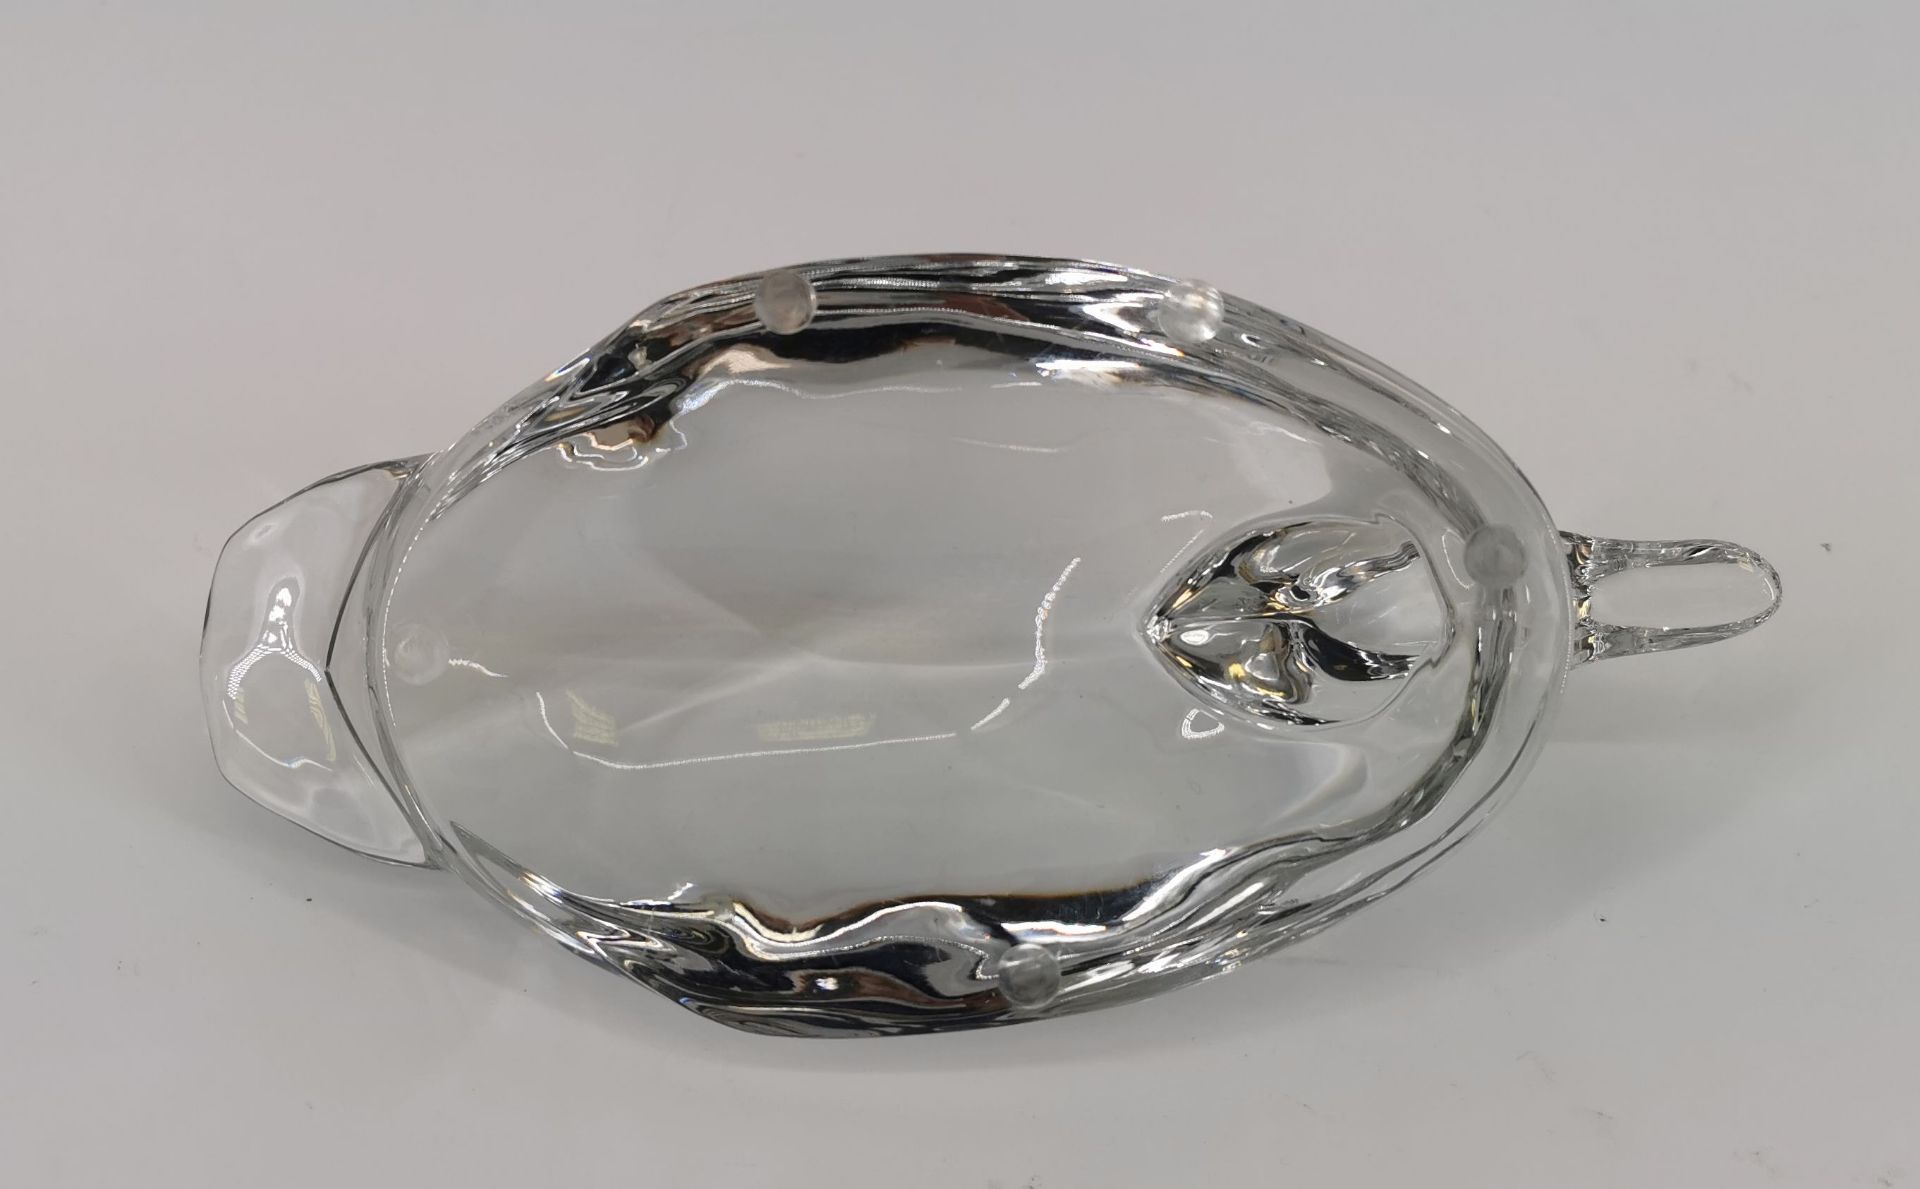 GLASS FIGURE "DUCK" - Image 3 of 3